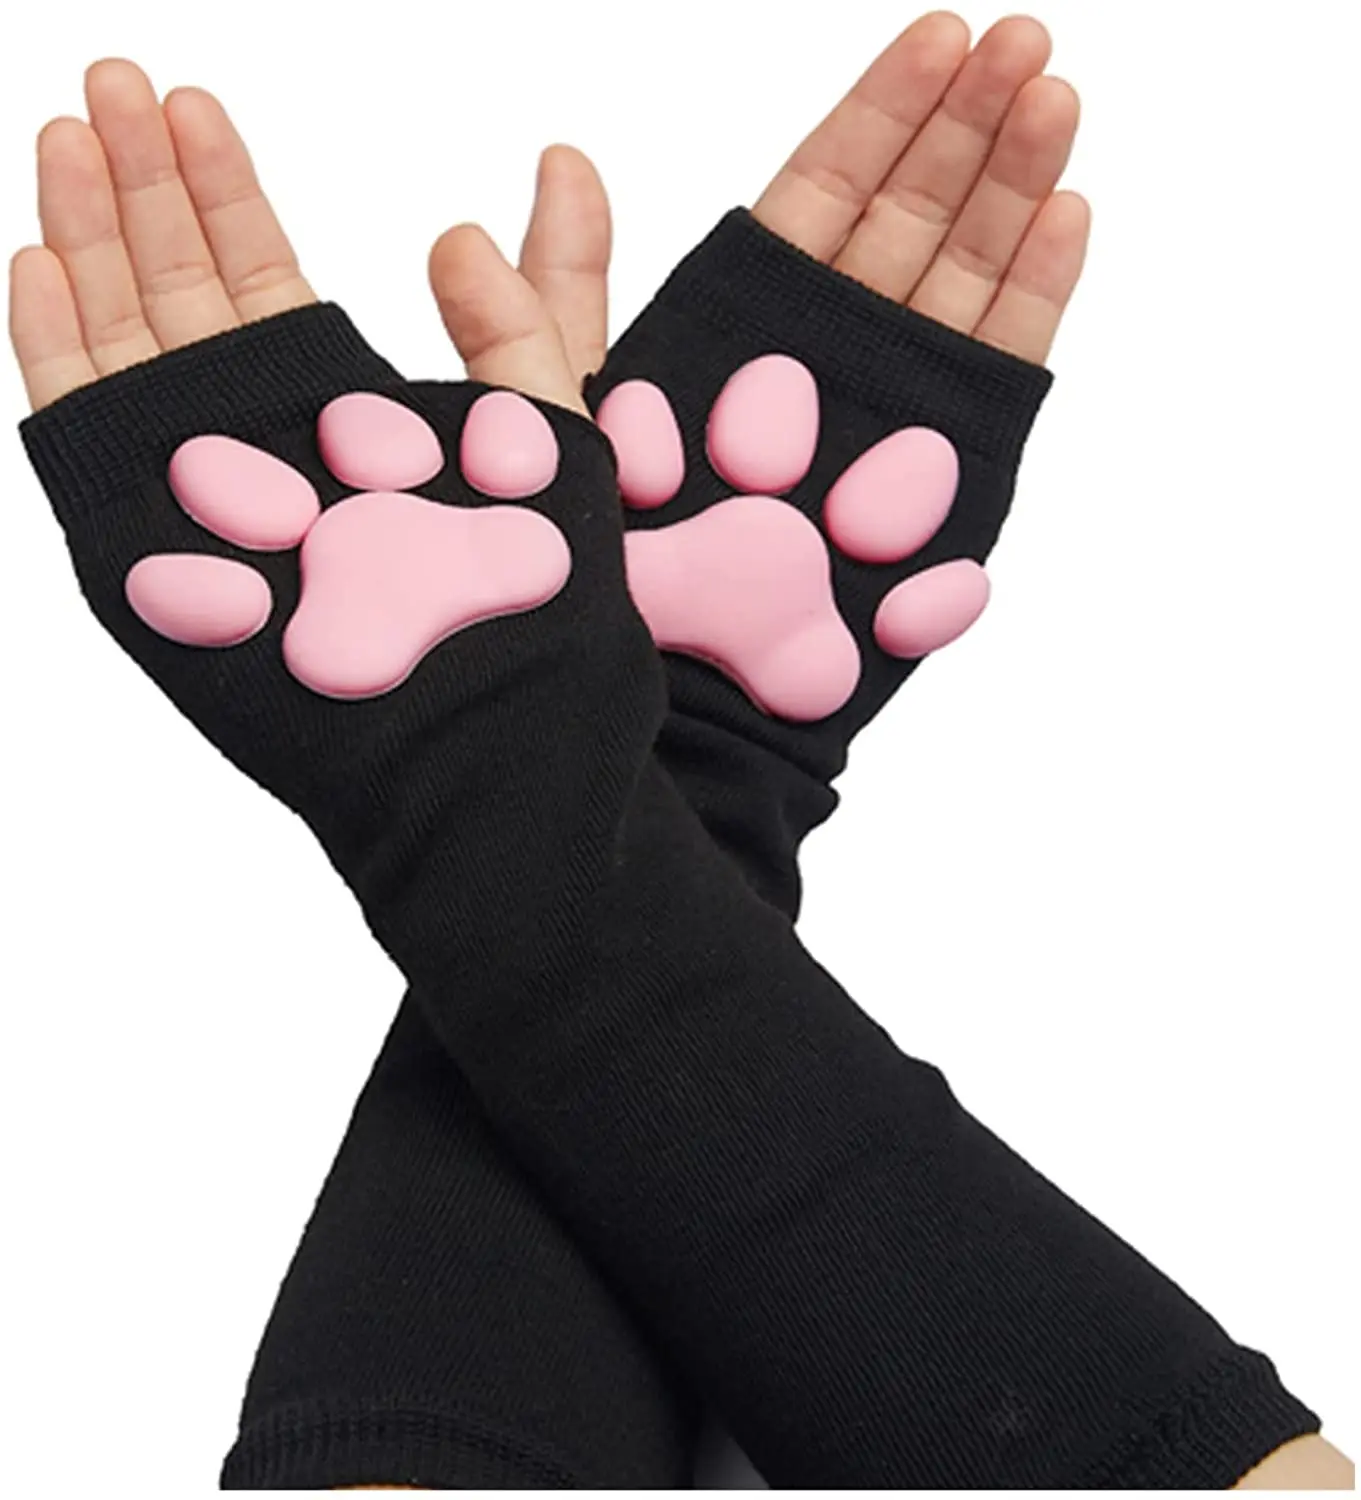 UV Sun Protection Stretchy Cute Cat Claw 3D Toes Beans Fingerless Sleeves Tattoo Cover Up Outdoor Sports Arm Sleeves Warm Gloves takara tomy summer hello kitty thin section boys and girls outdoor sunscreen breathable ice sleeves students cute sleeves